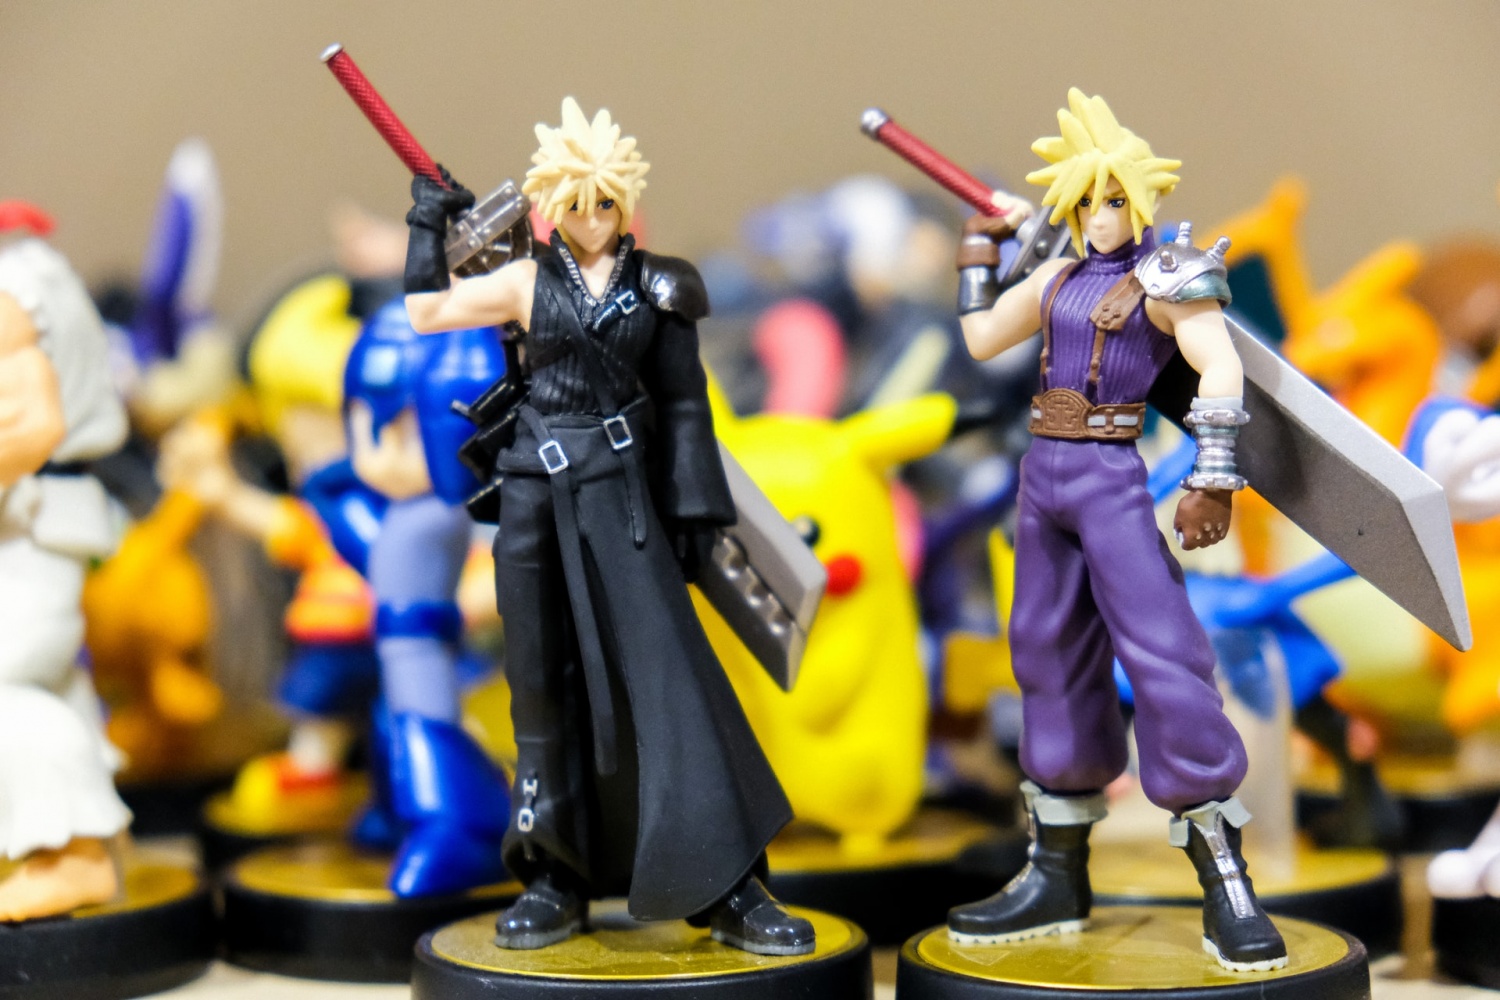 Square Enix Launches NFT Collection for 'Final Fantasy VII': Game About Taking Down a Corporation that's Destroying the Planet